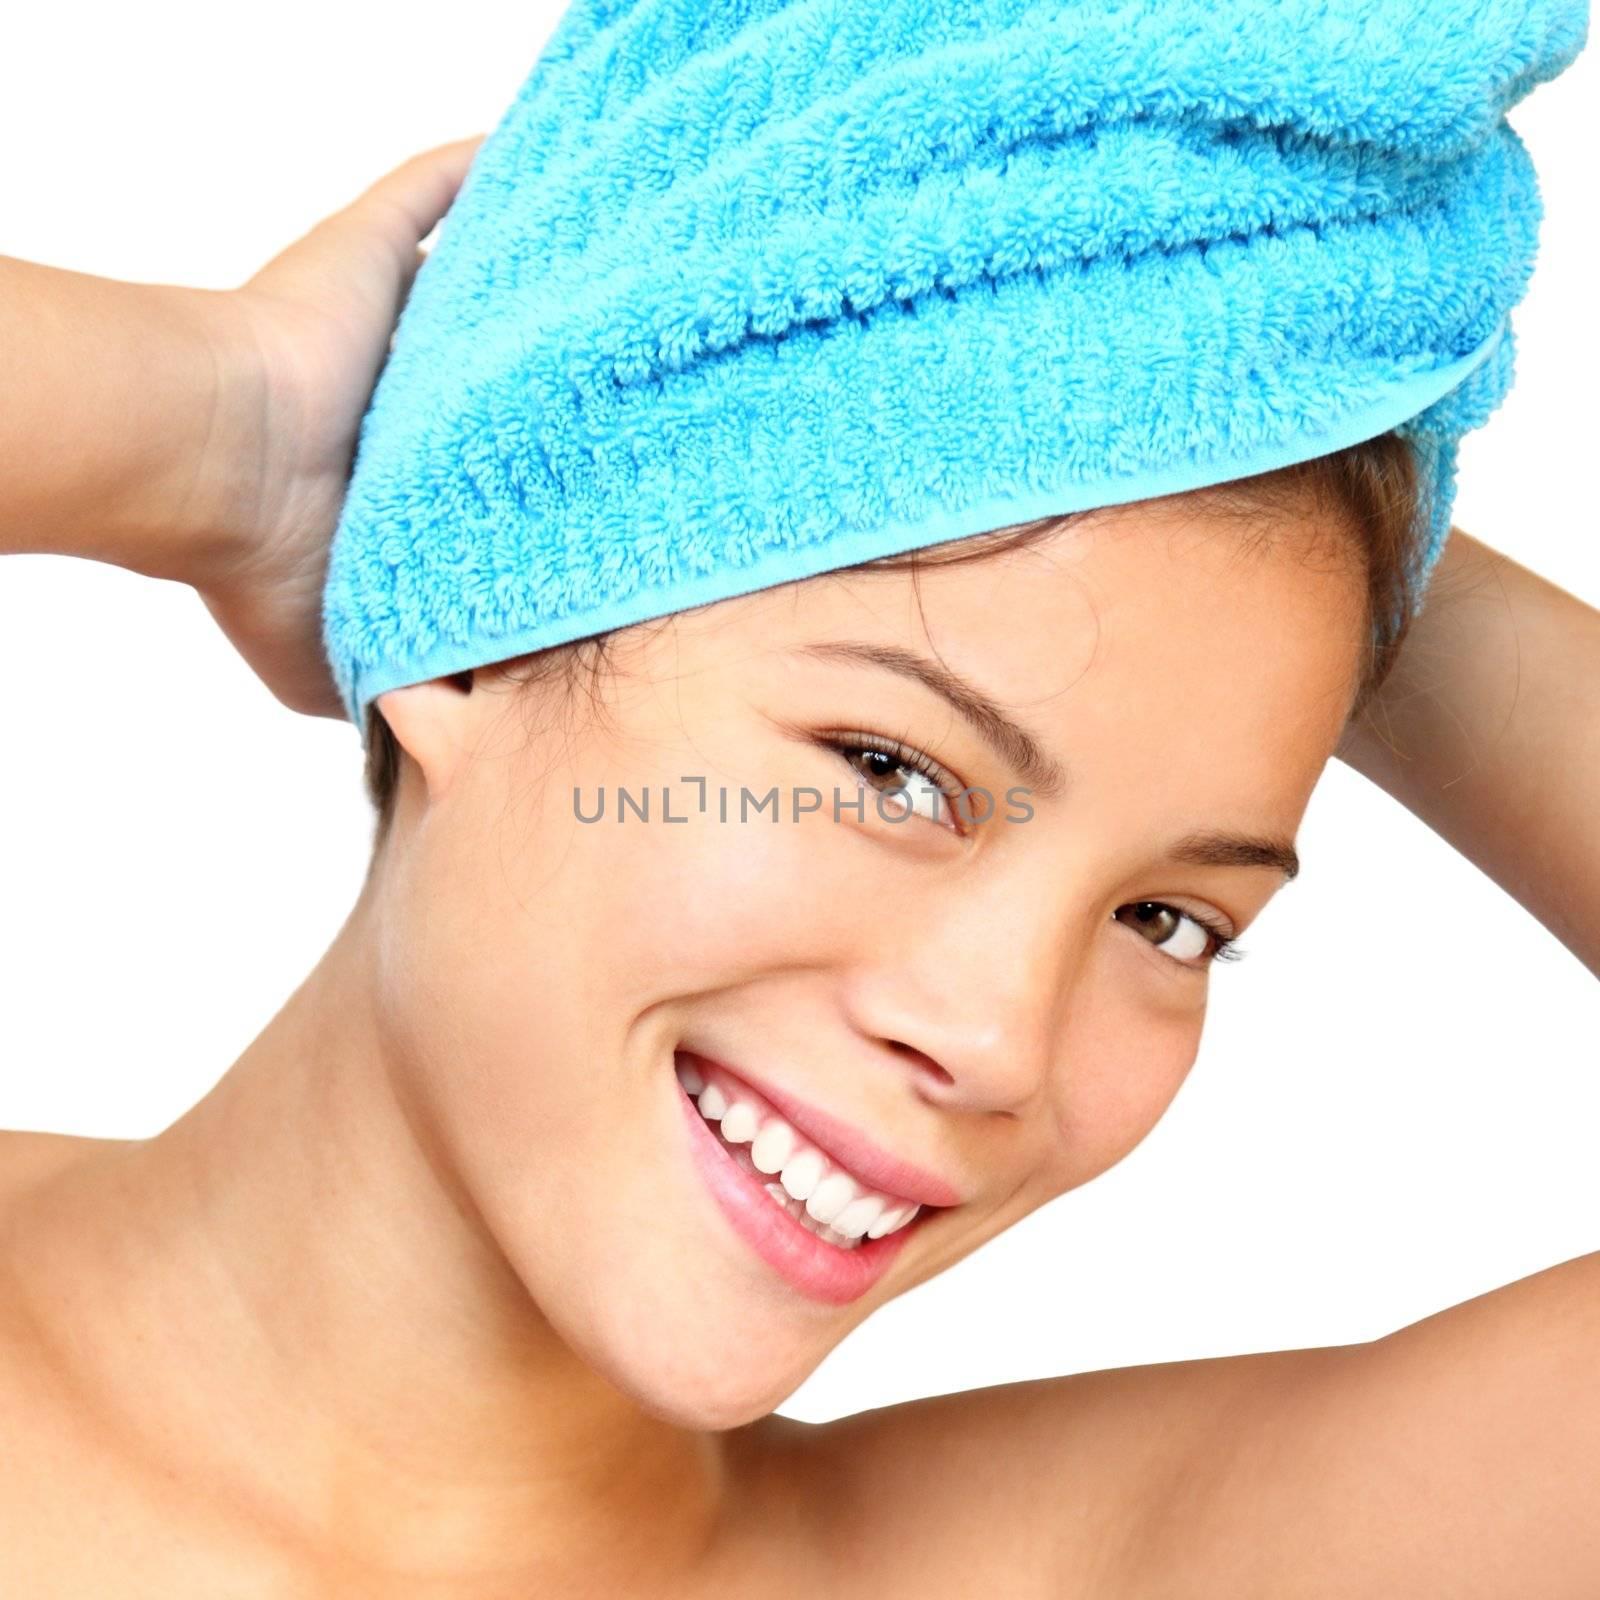 Towel woman. Smiling woman with towels just out of the shower. Beautiful mixed asian / caucasian young woman model. Isolated on white background.